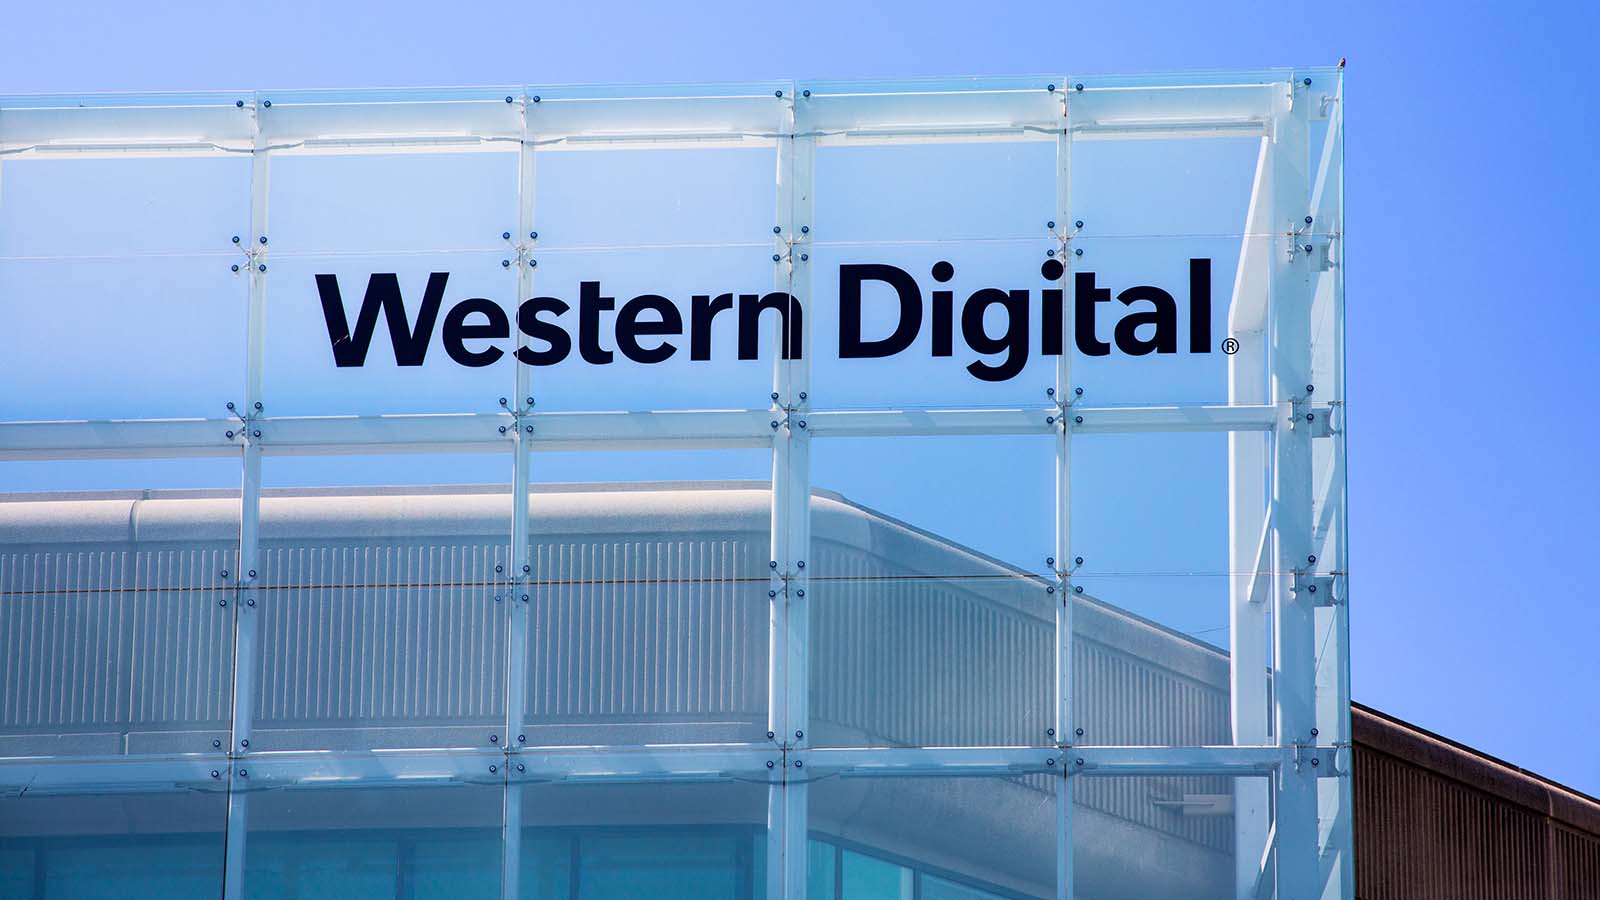 Front of a Western Digital (WDC Stock) building in Malpitas, California.